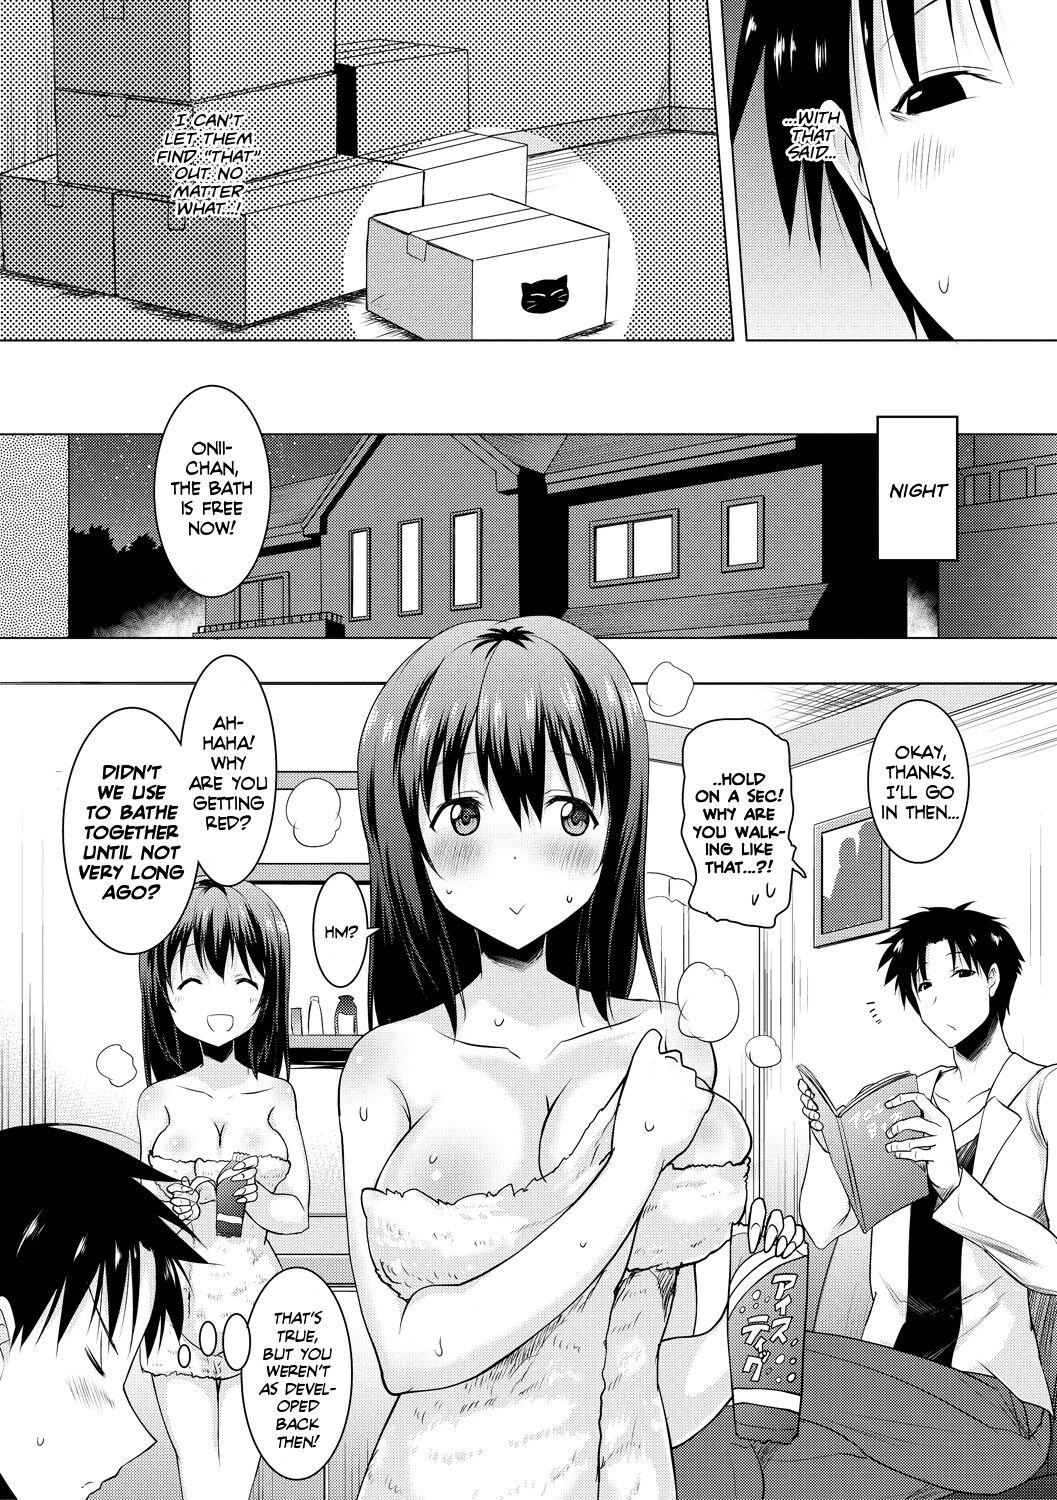 [Pony-R] I Can't Live Without My Little Sister's Tongue Chapter 01-02 + Secret Baby-making Sex with a Big-titted Mother and Daughter! (Kyonyuu Oyako no Shita to Shikyuu ni Renzoku Shasei) [English] [Team Rabu2] [Digital] 6